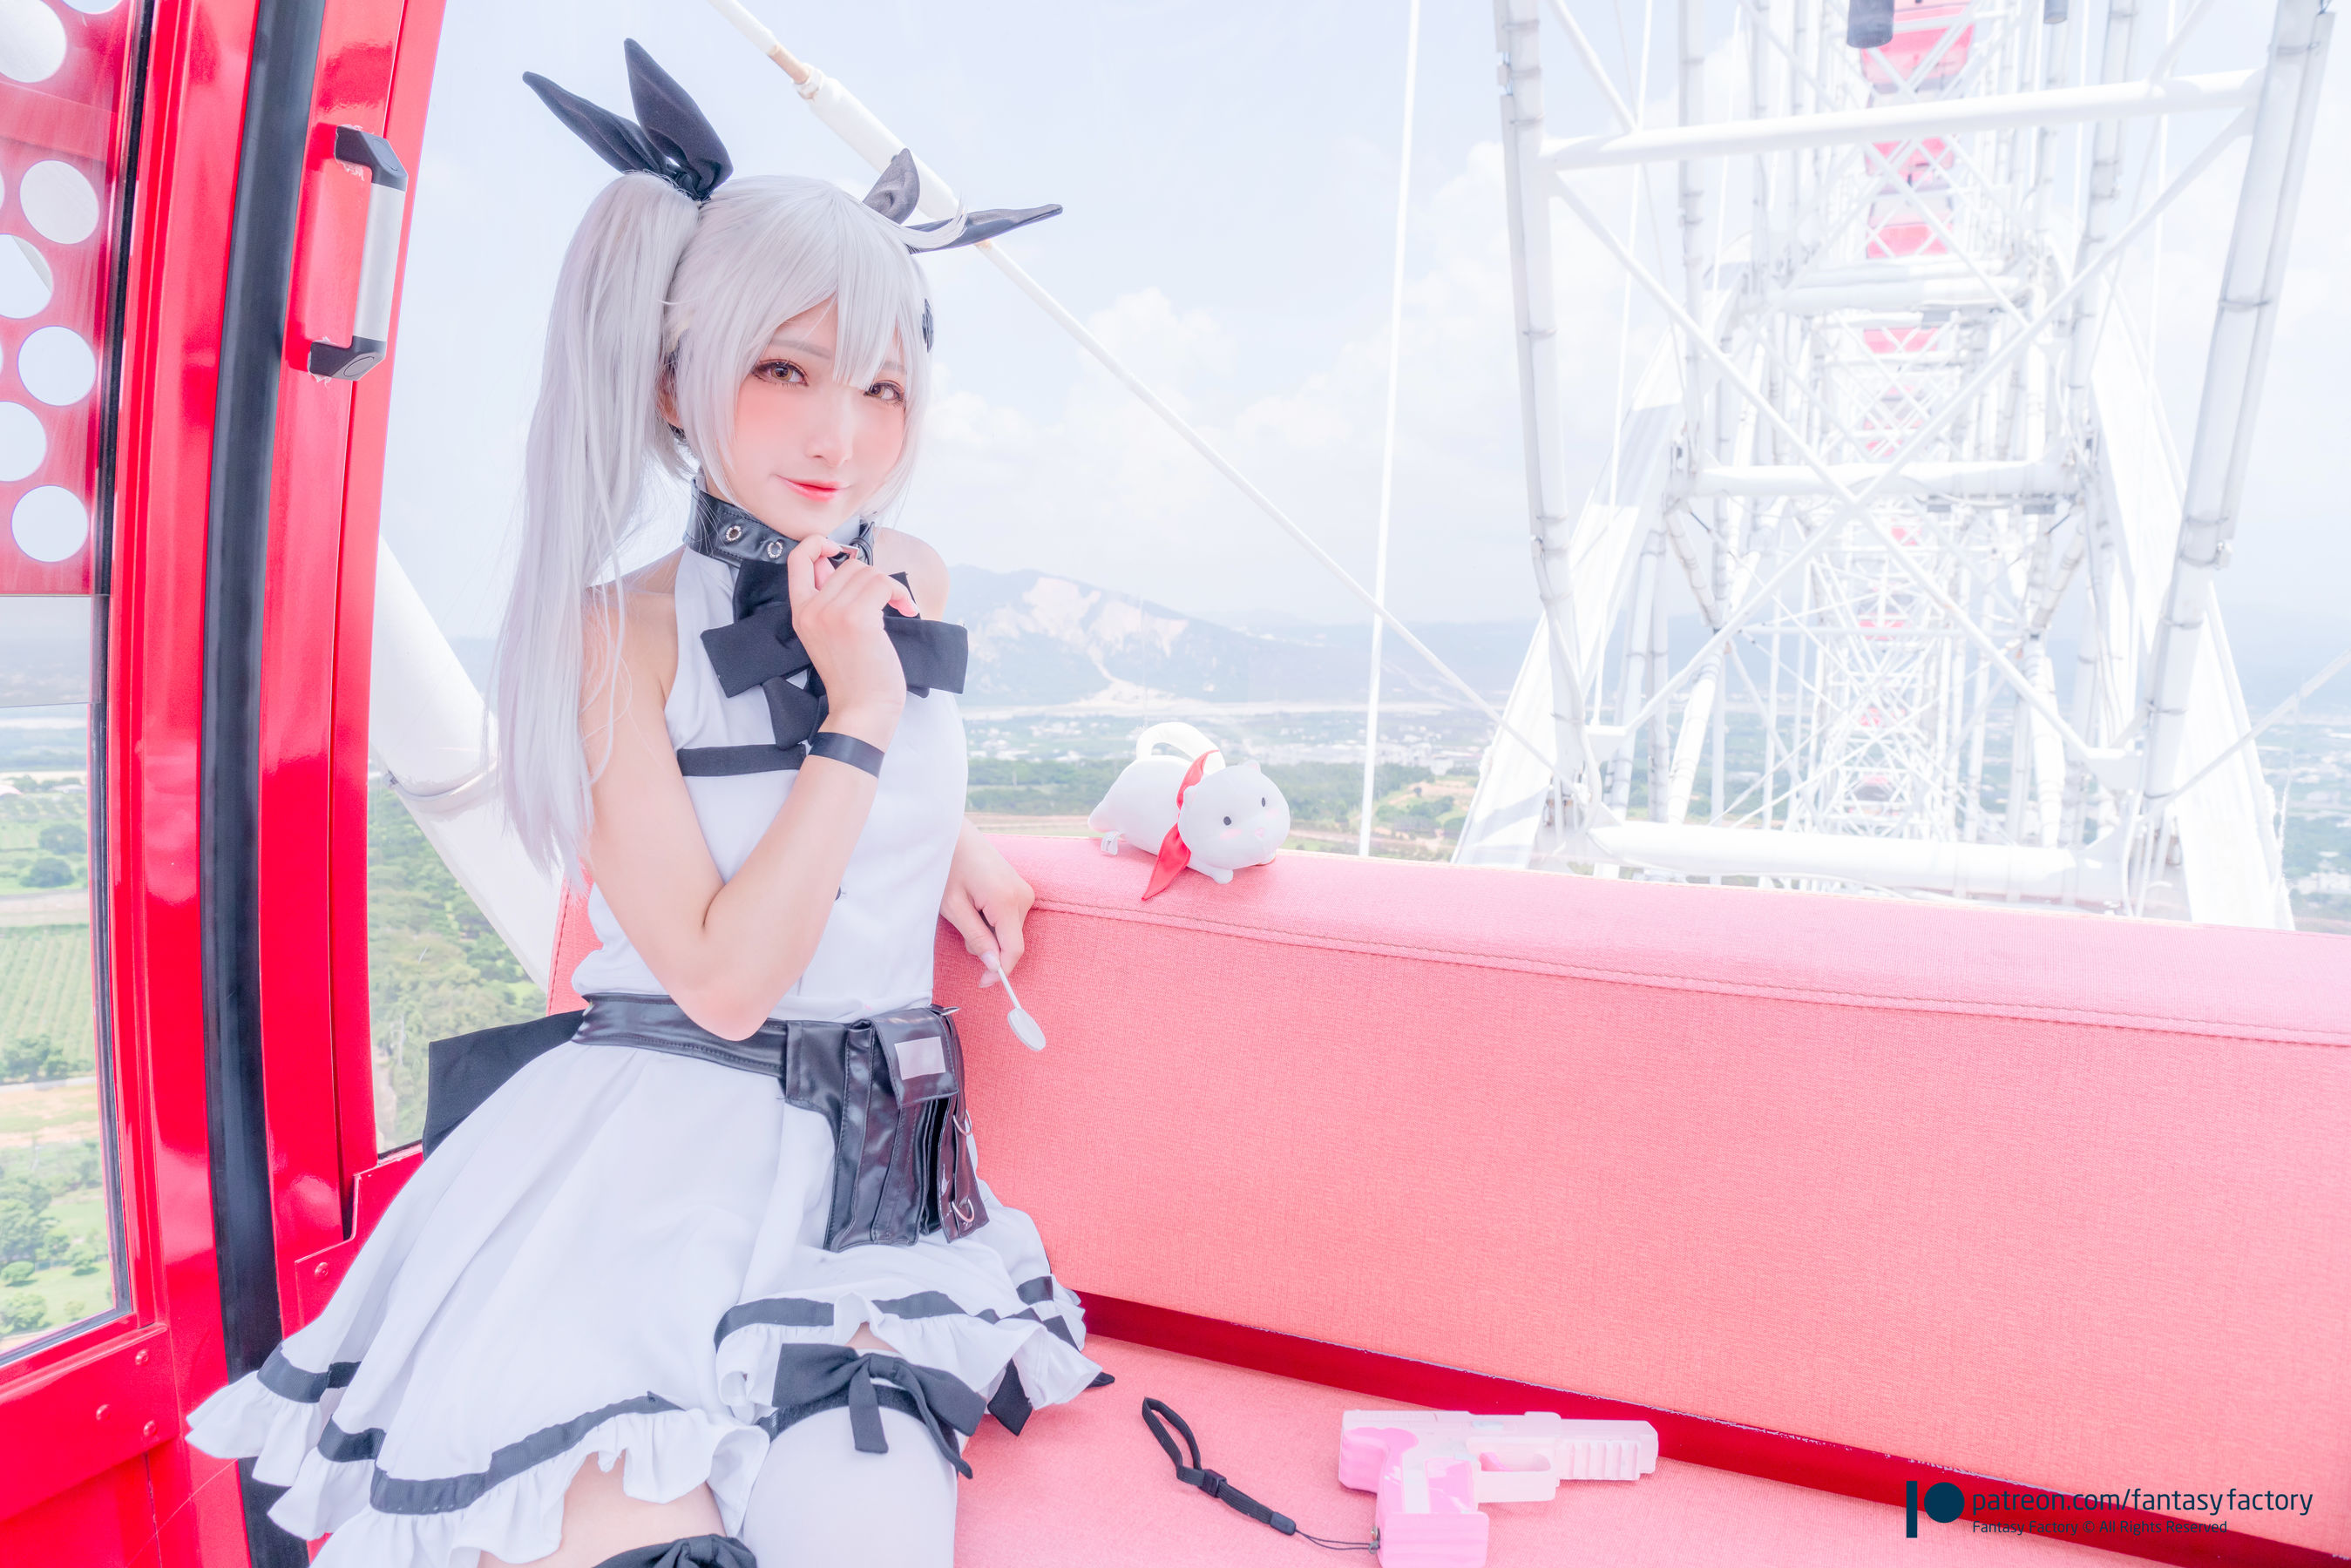 Cosplay Photo Xiao Ding "Fantasy Factory" - 2019.11 Black and Whi...